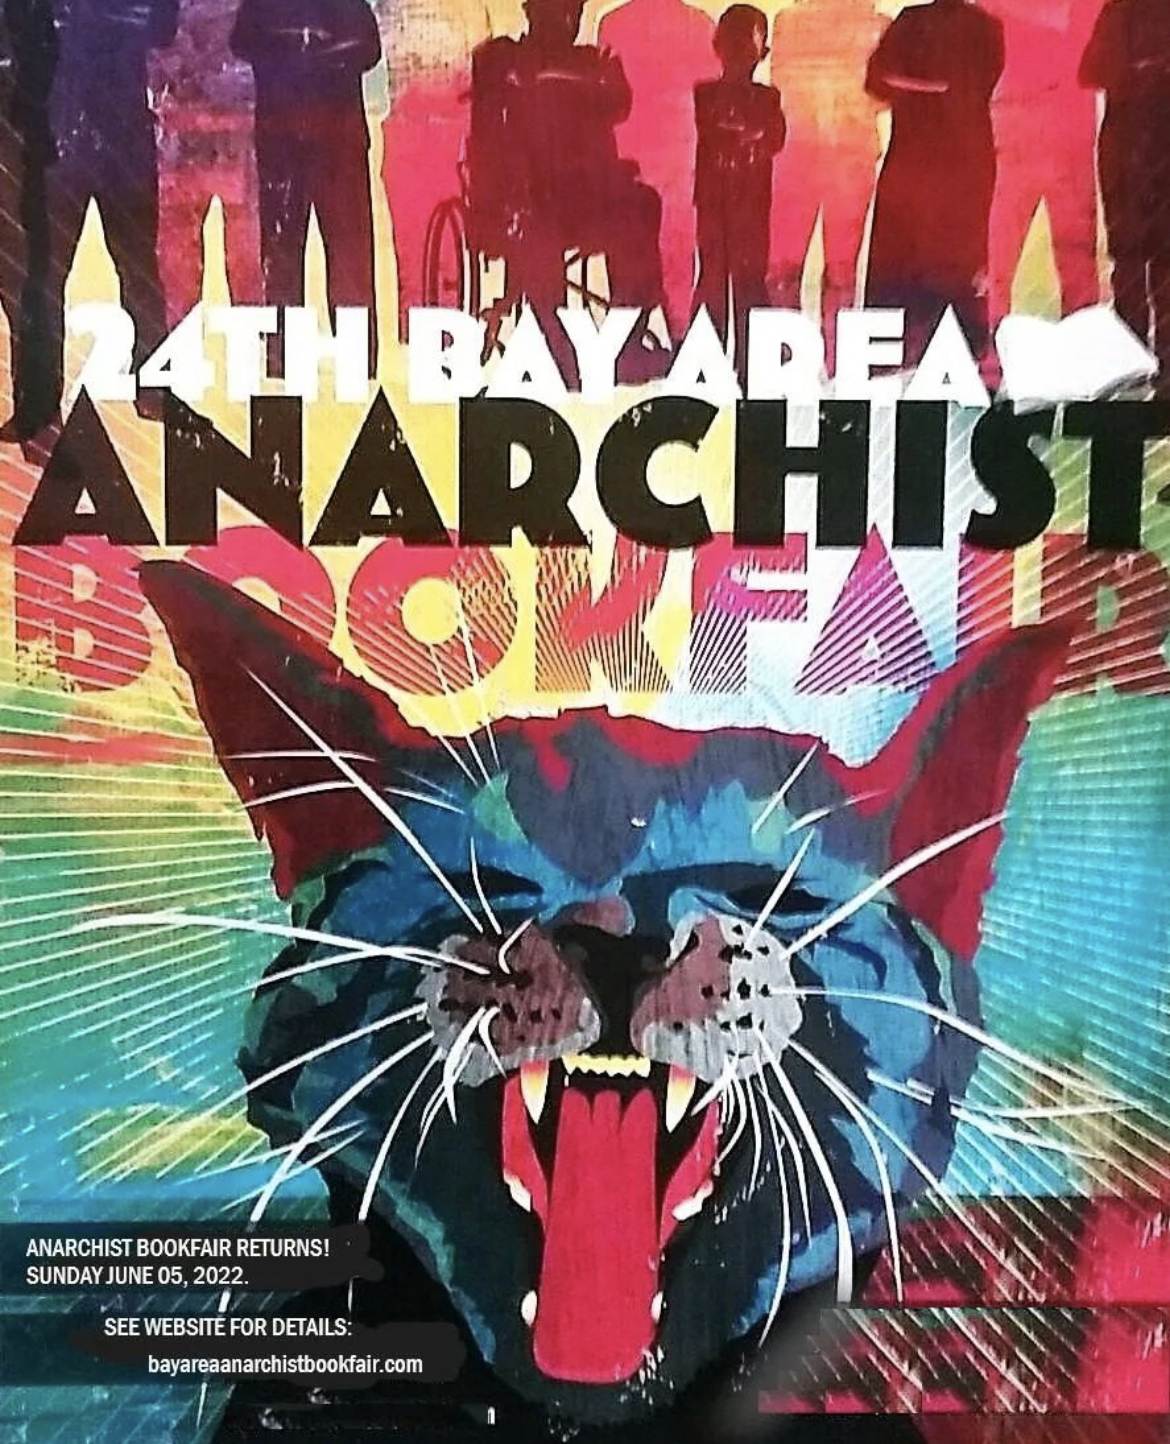 ID: Graphic features a black/blue cat with showing its teeth. Text reads, "24th Bay Area Anarchist Bookfair Anarchist Bookfair Returns! Sunday, June 5, 2022 See Website for details bayareaanarchistbookfair.com"